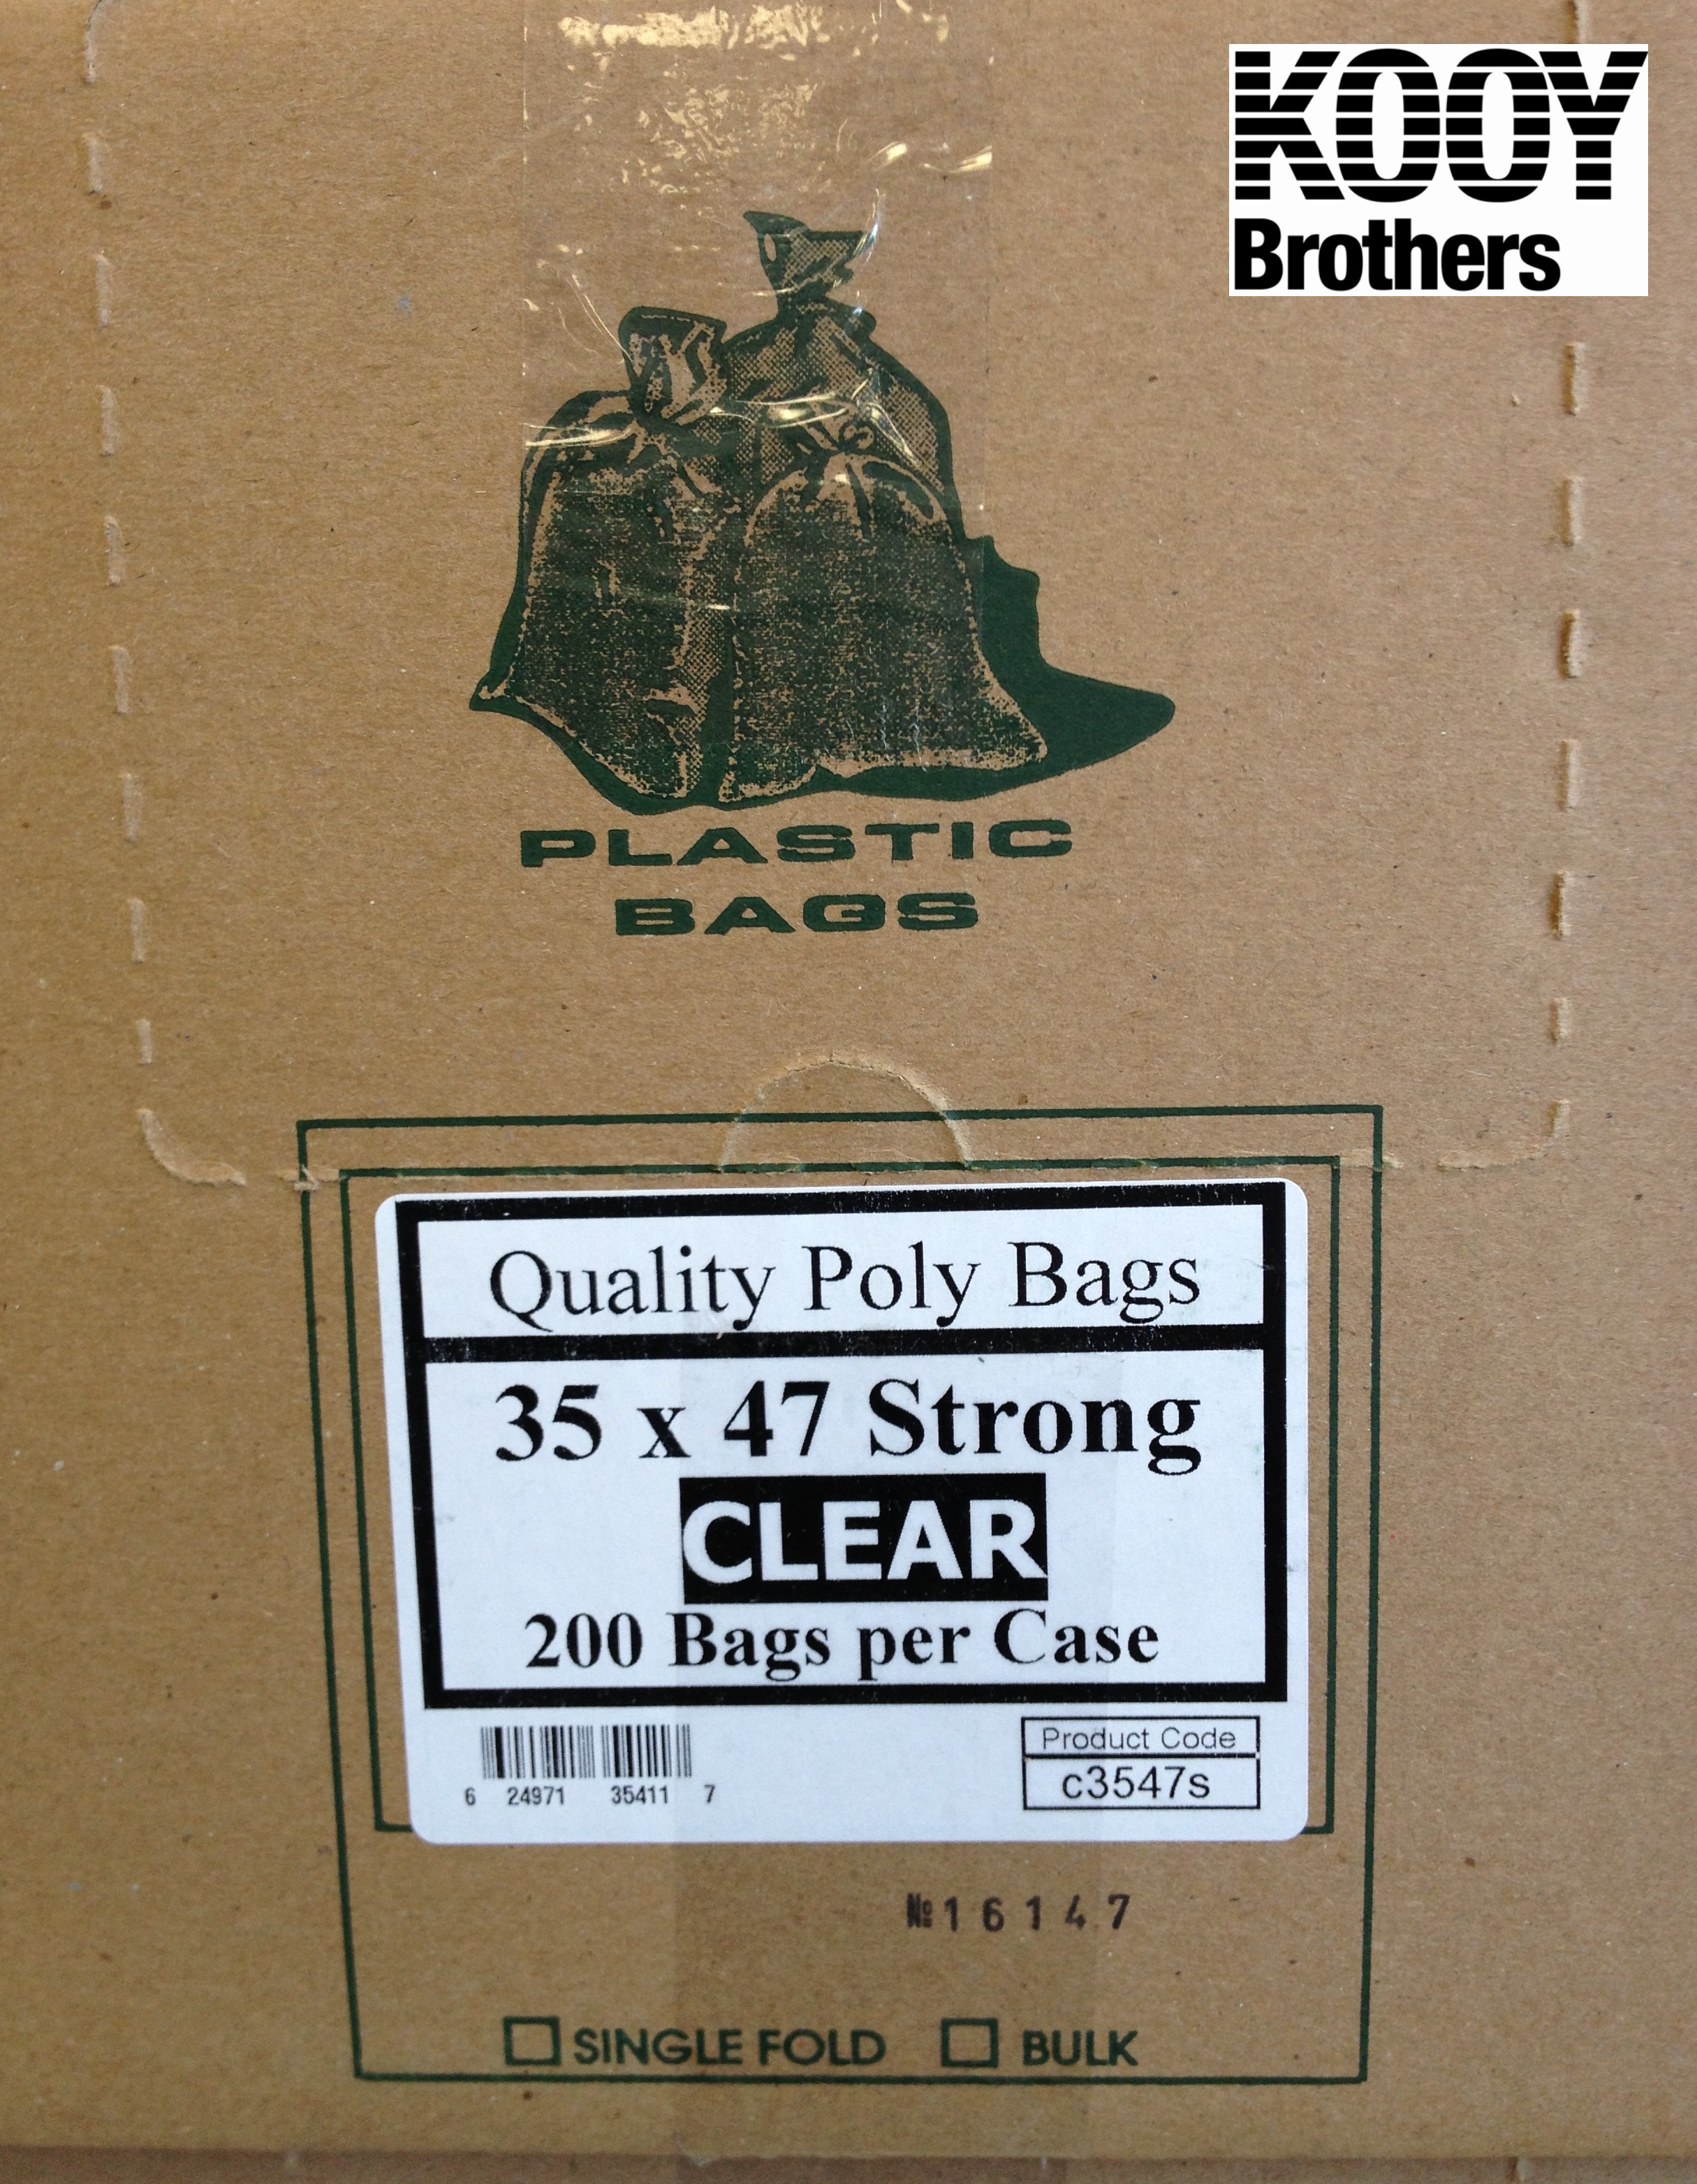 Clear Plastic Garbage Bags